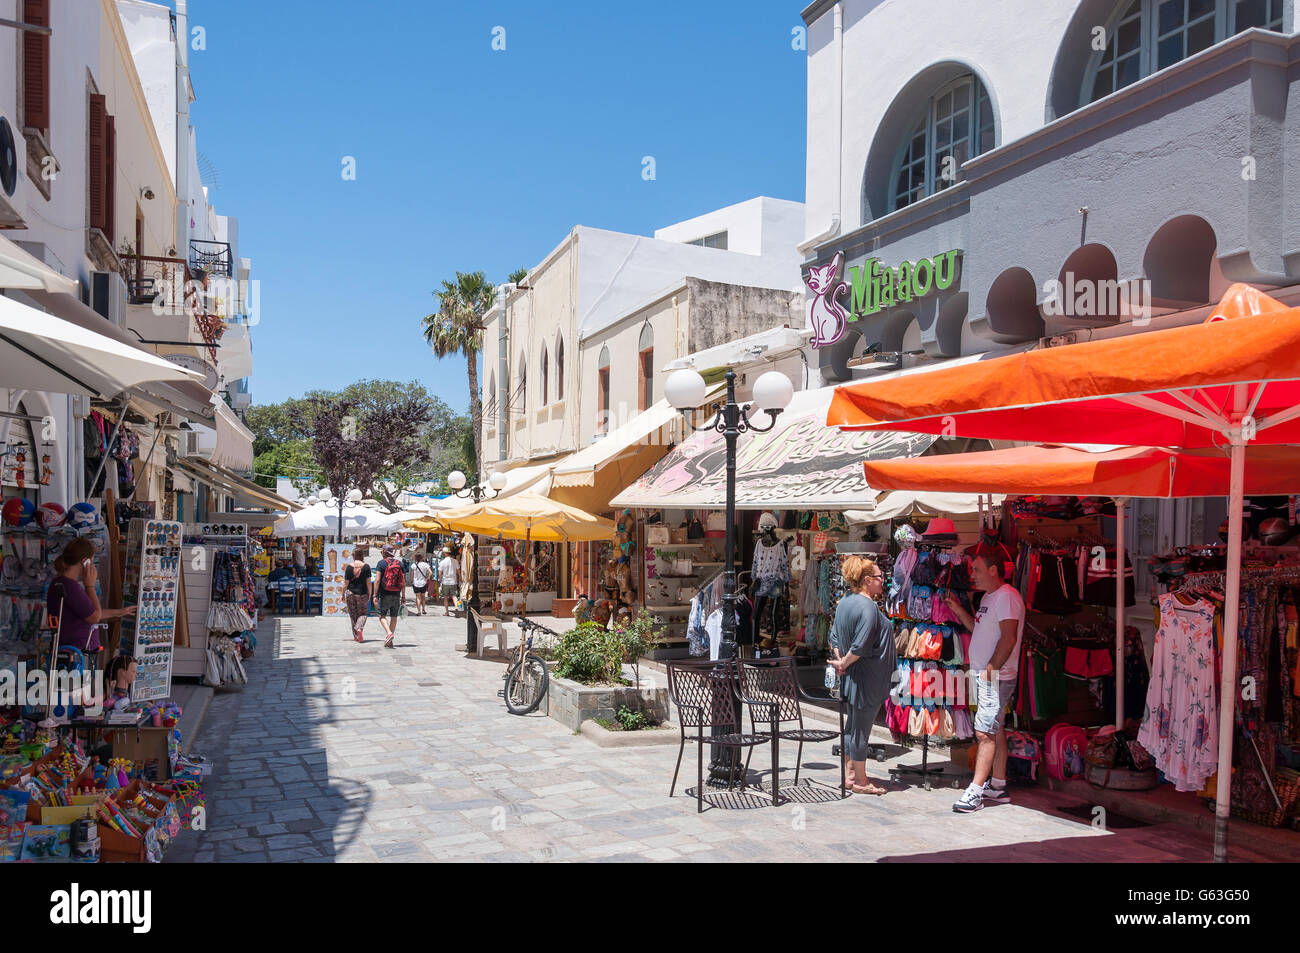 Tourist shops in Old Town, Kos Town, Kos (Cos), The Dodecanese, South Aegean Region, Greece Stock Photo